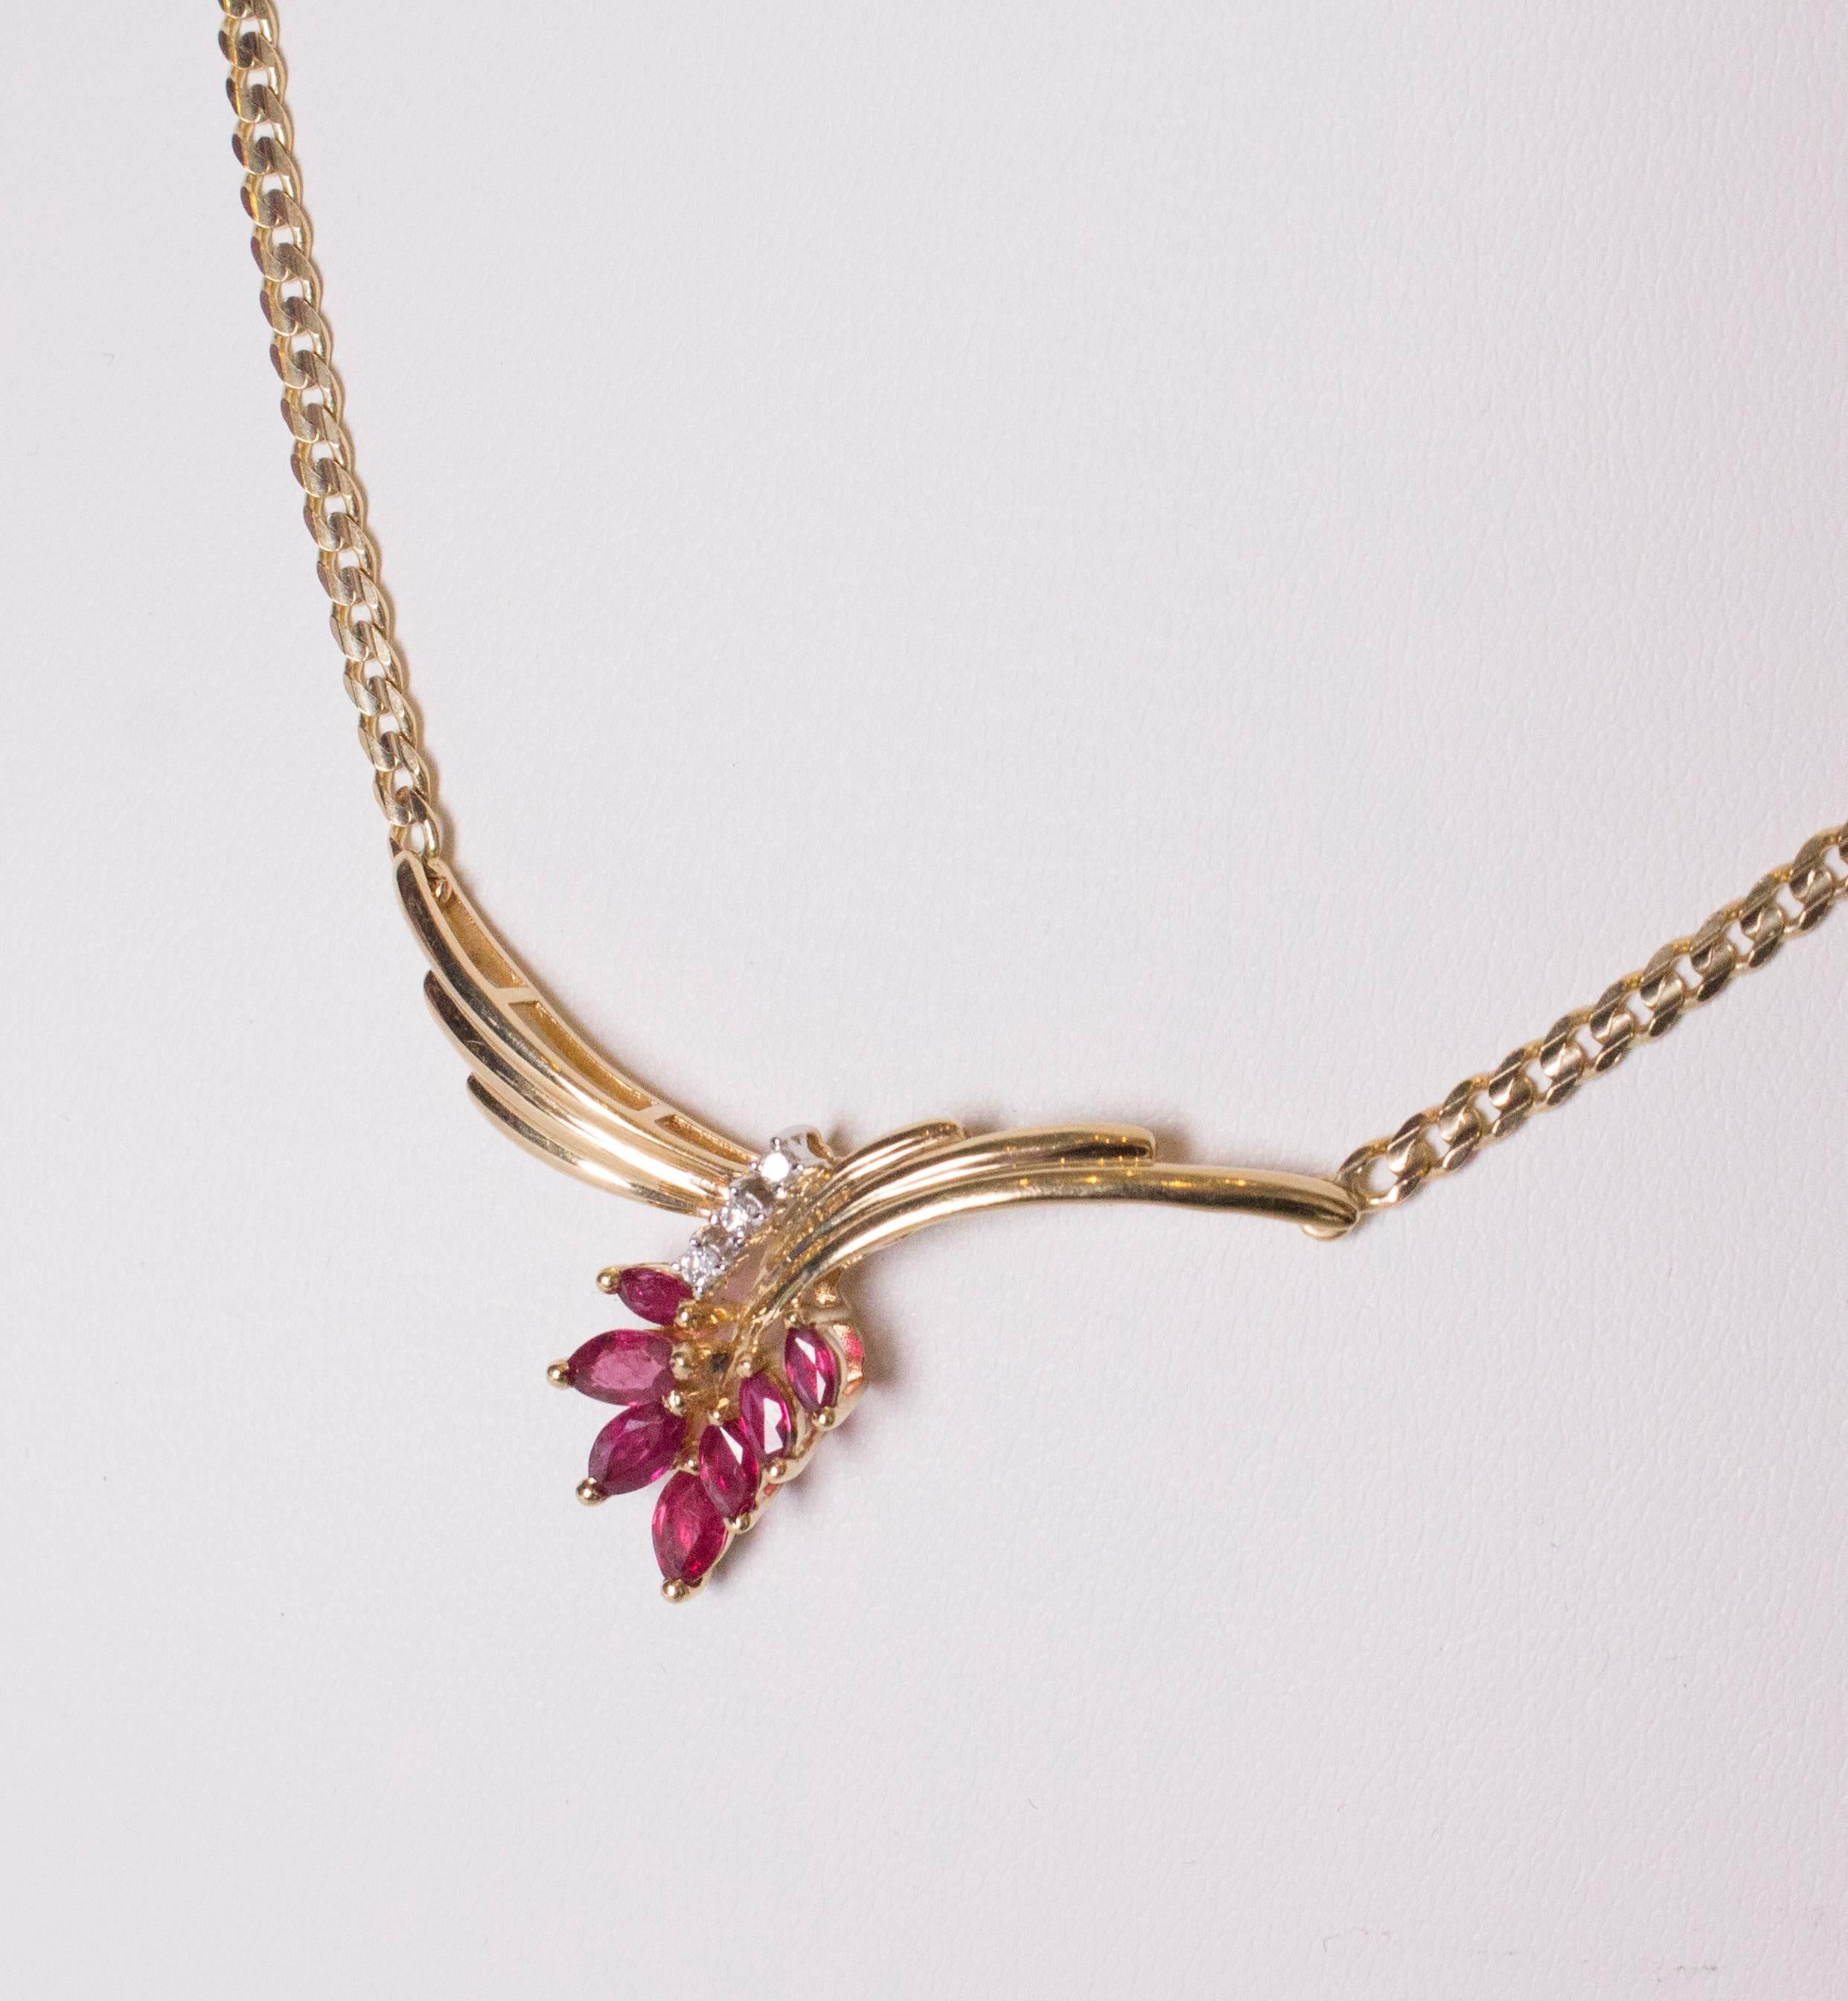 A stunning ruby, diamond and gold necklace.  The pendant is composed of 7 rubies, 3 diamonds, set in gold in a wing like design.